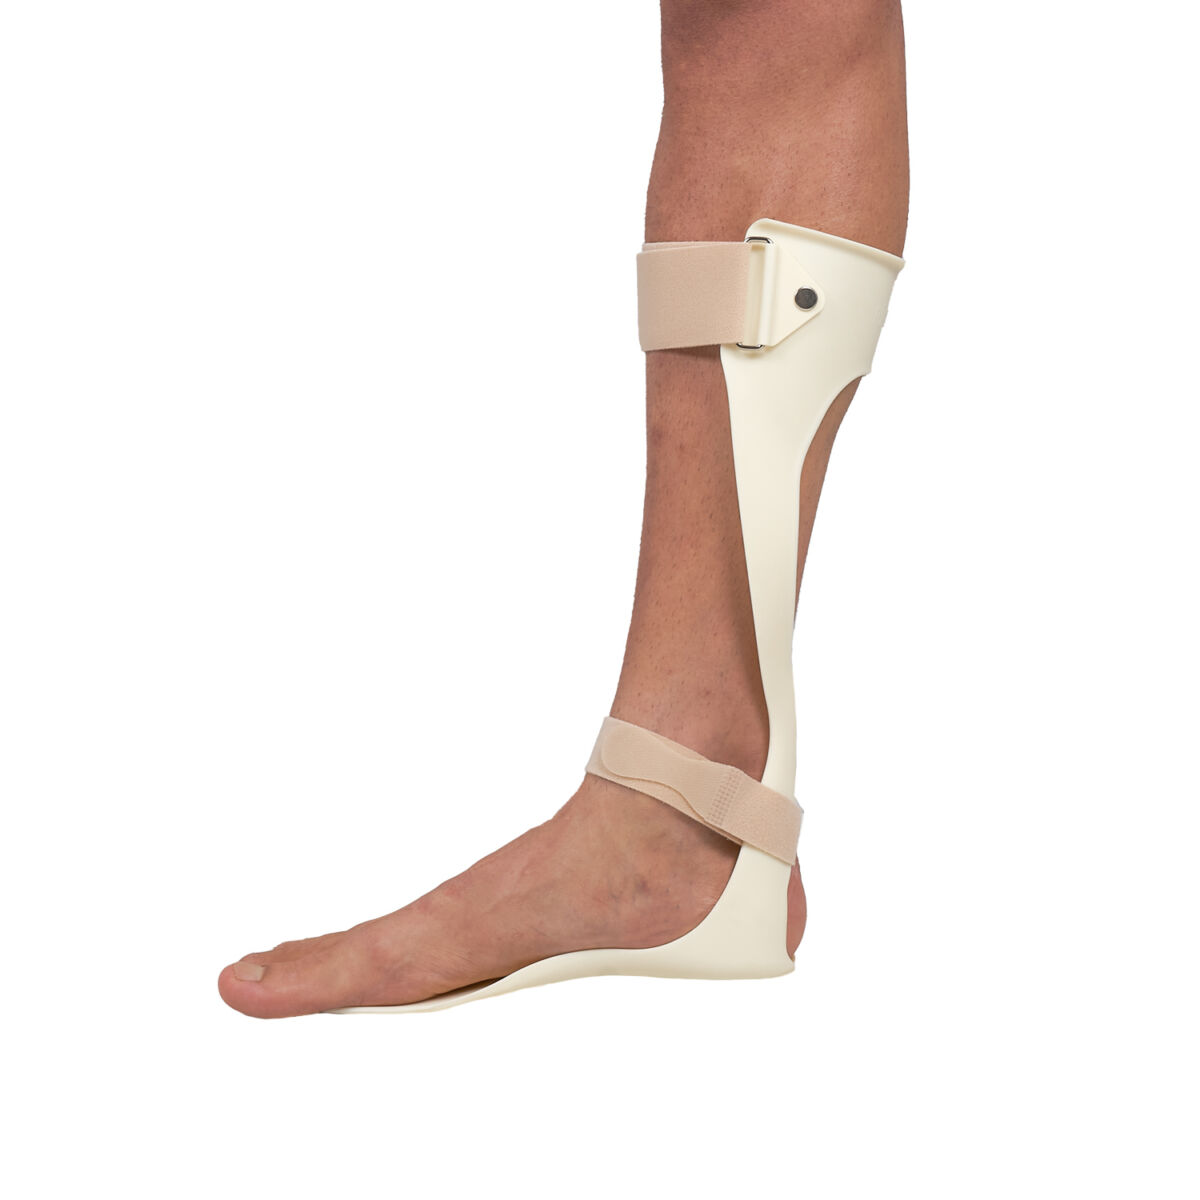 wingmed orthopedic products manufacturer wholesale ankle braces and foot supports W617 refleks afo 2